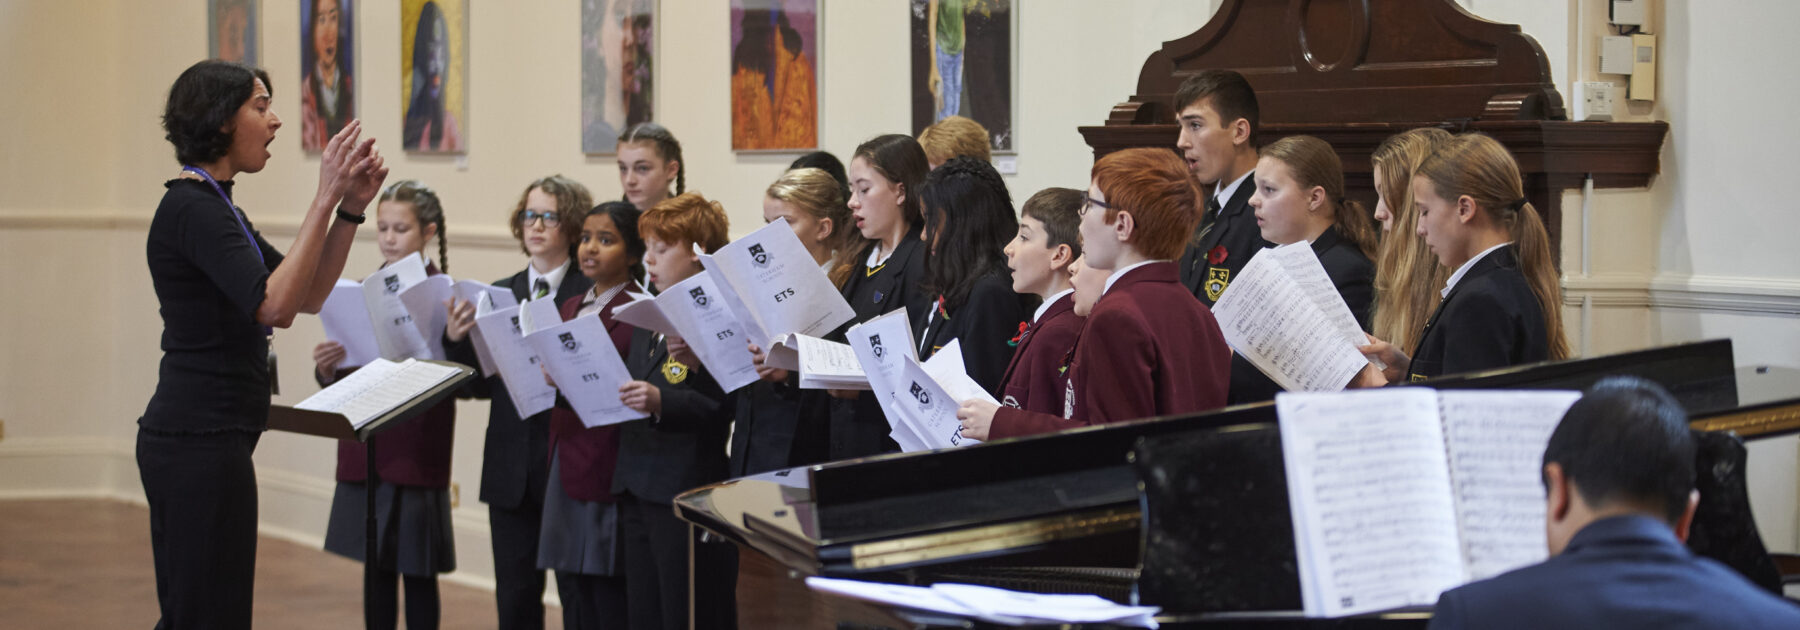 Choirs perform a moving Recital at Remembrance Day